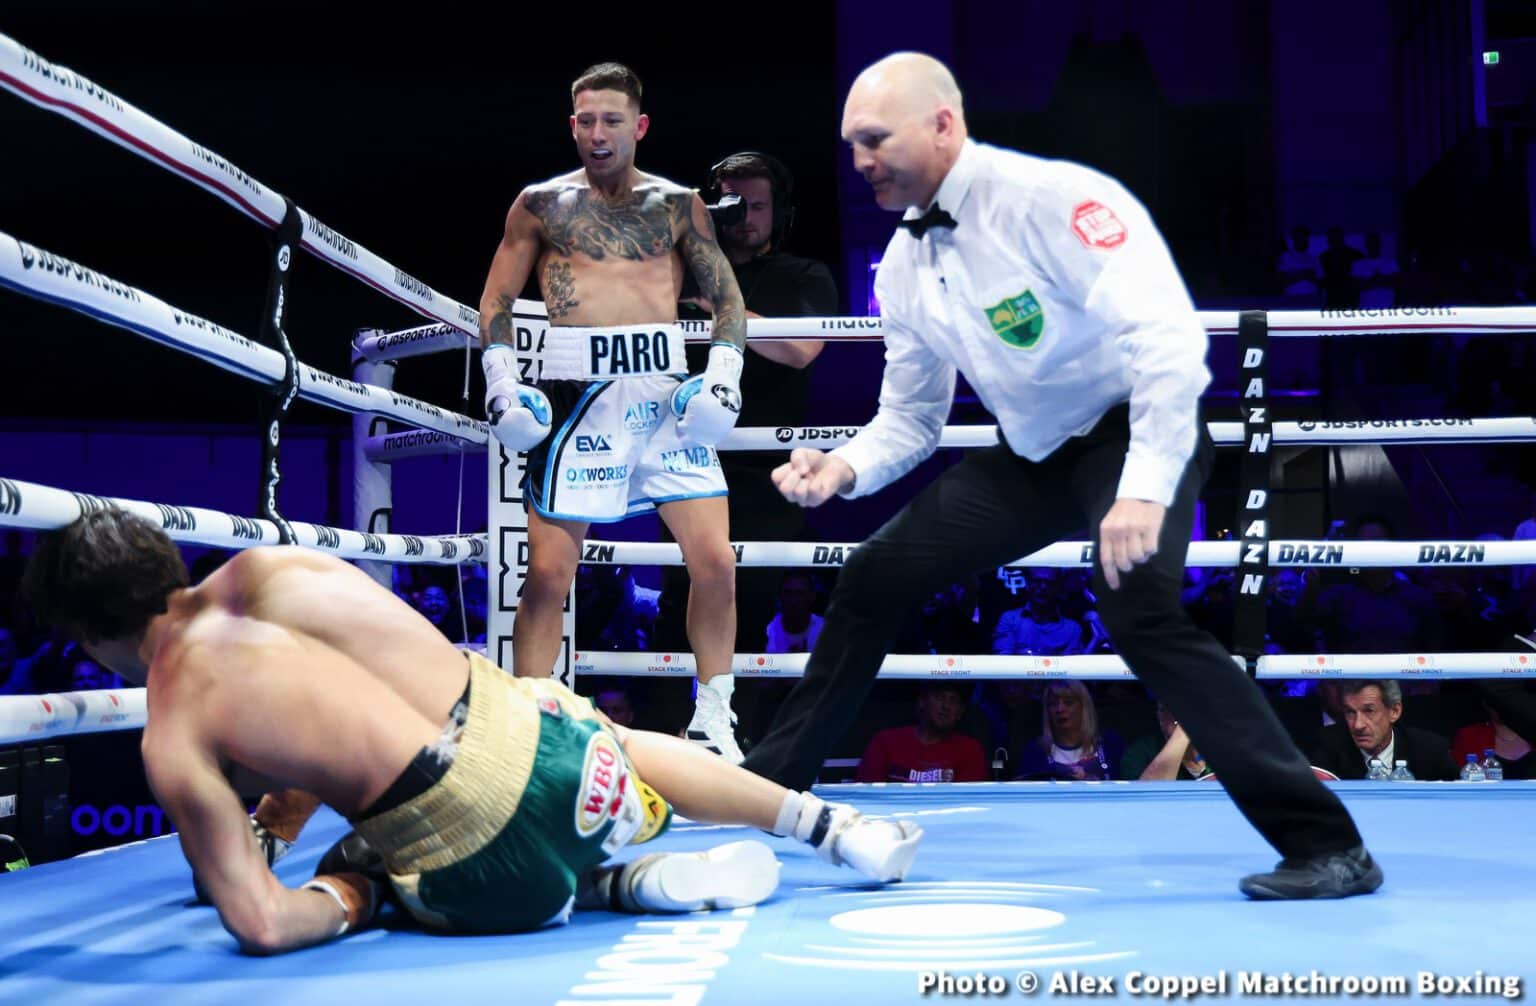 Liam Paro Scores Highlight Reel KO Over Brock Jarvis - Boxing Results ...